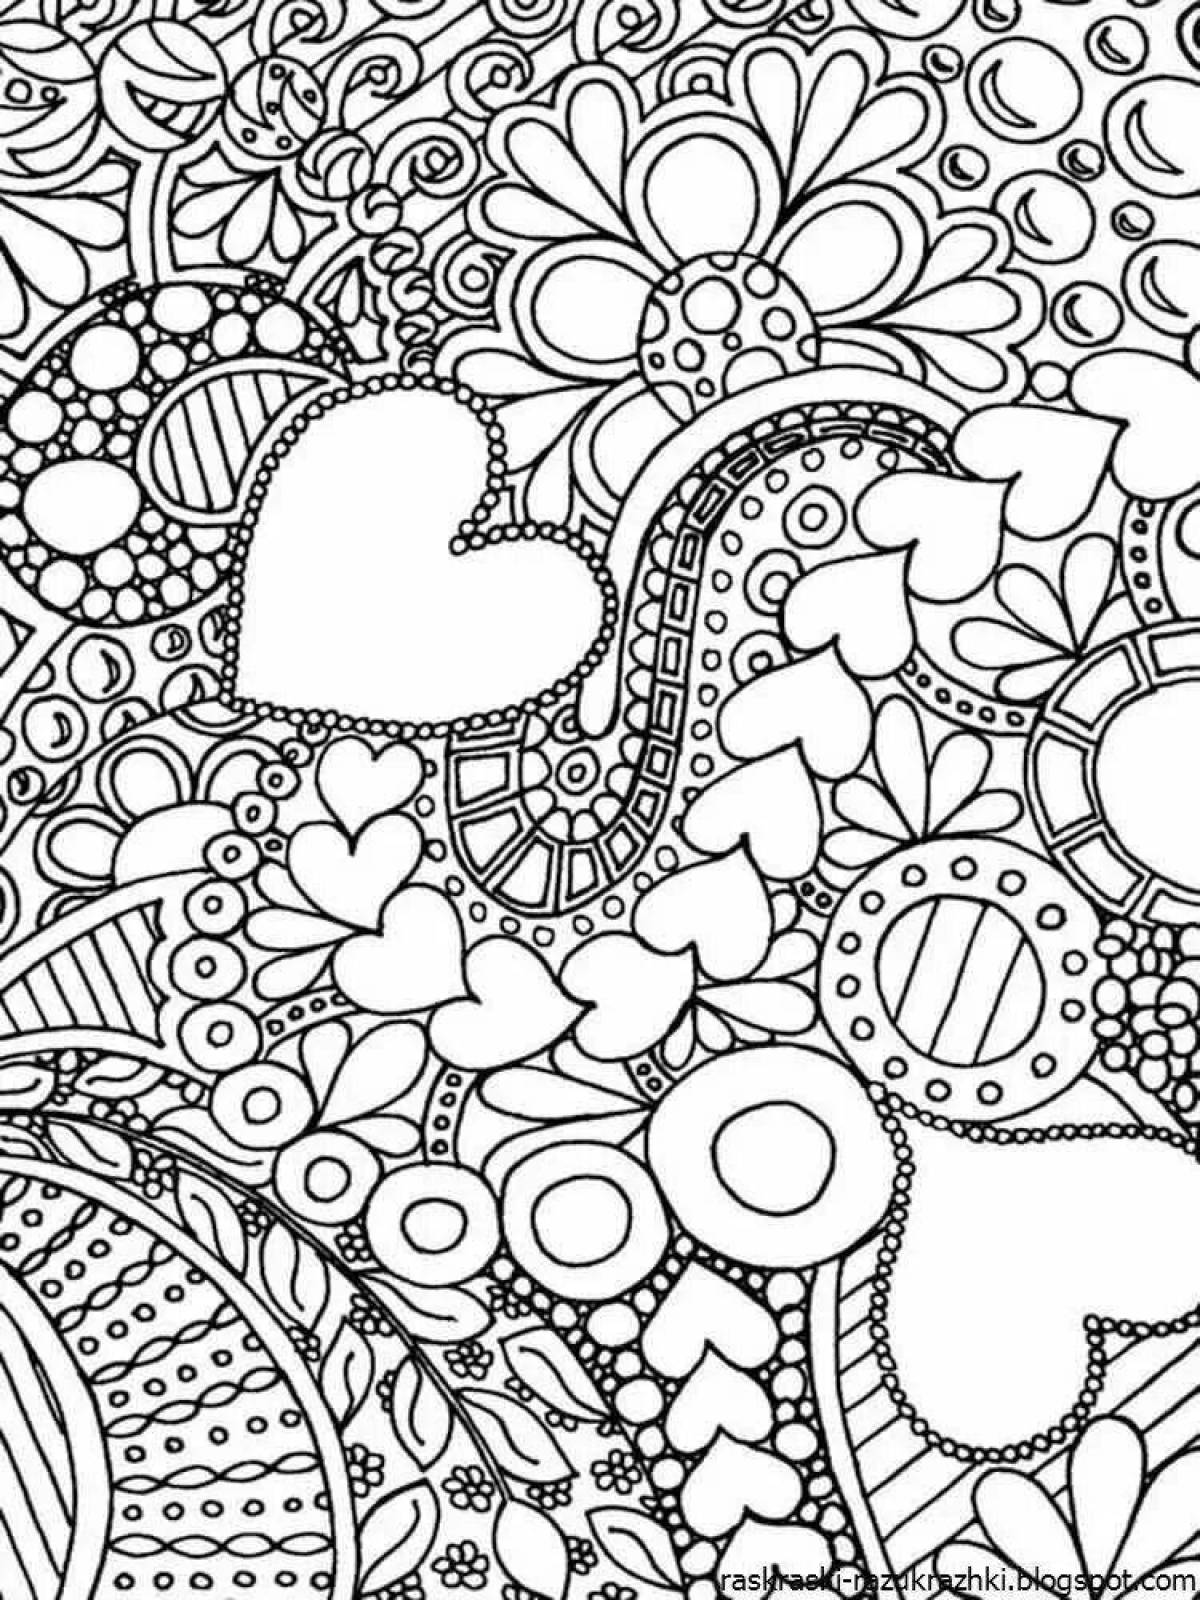 Deluxe coloring book, very beautiful and complex